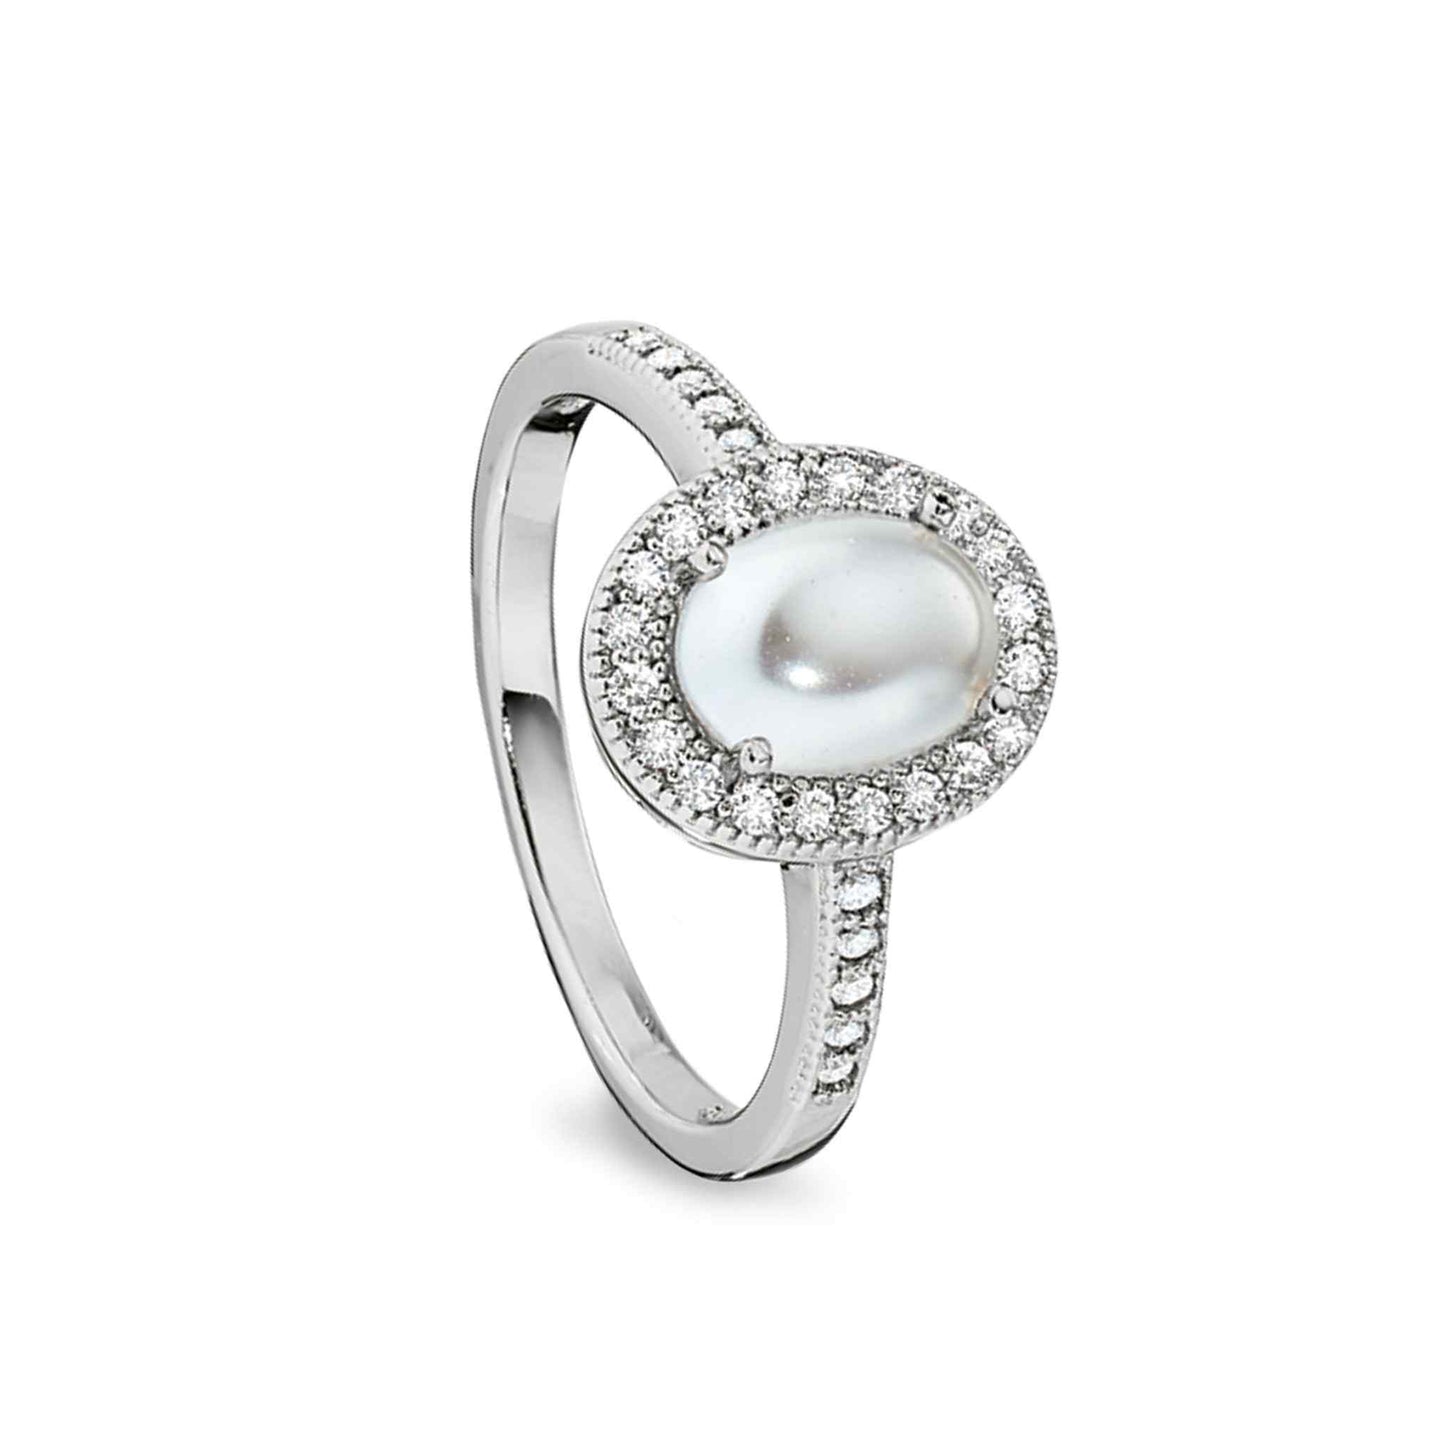 A cabochon cut pearl ring with simulated diamonds displayed on a neutral white background.